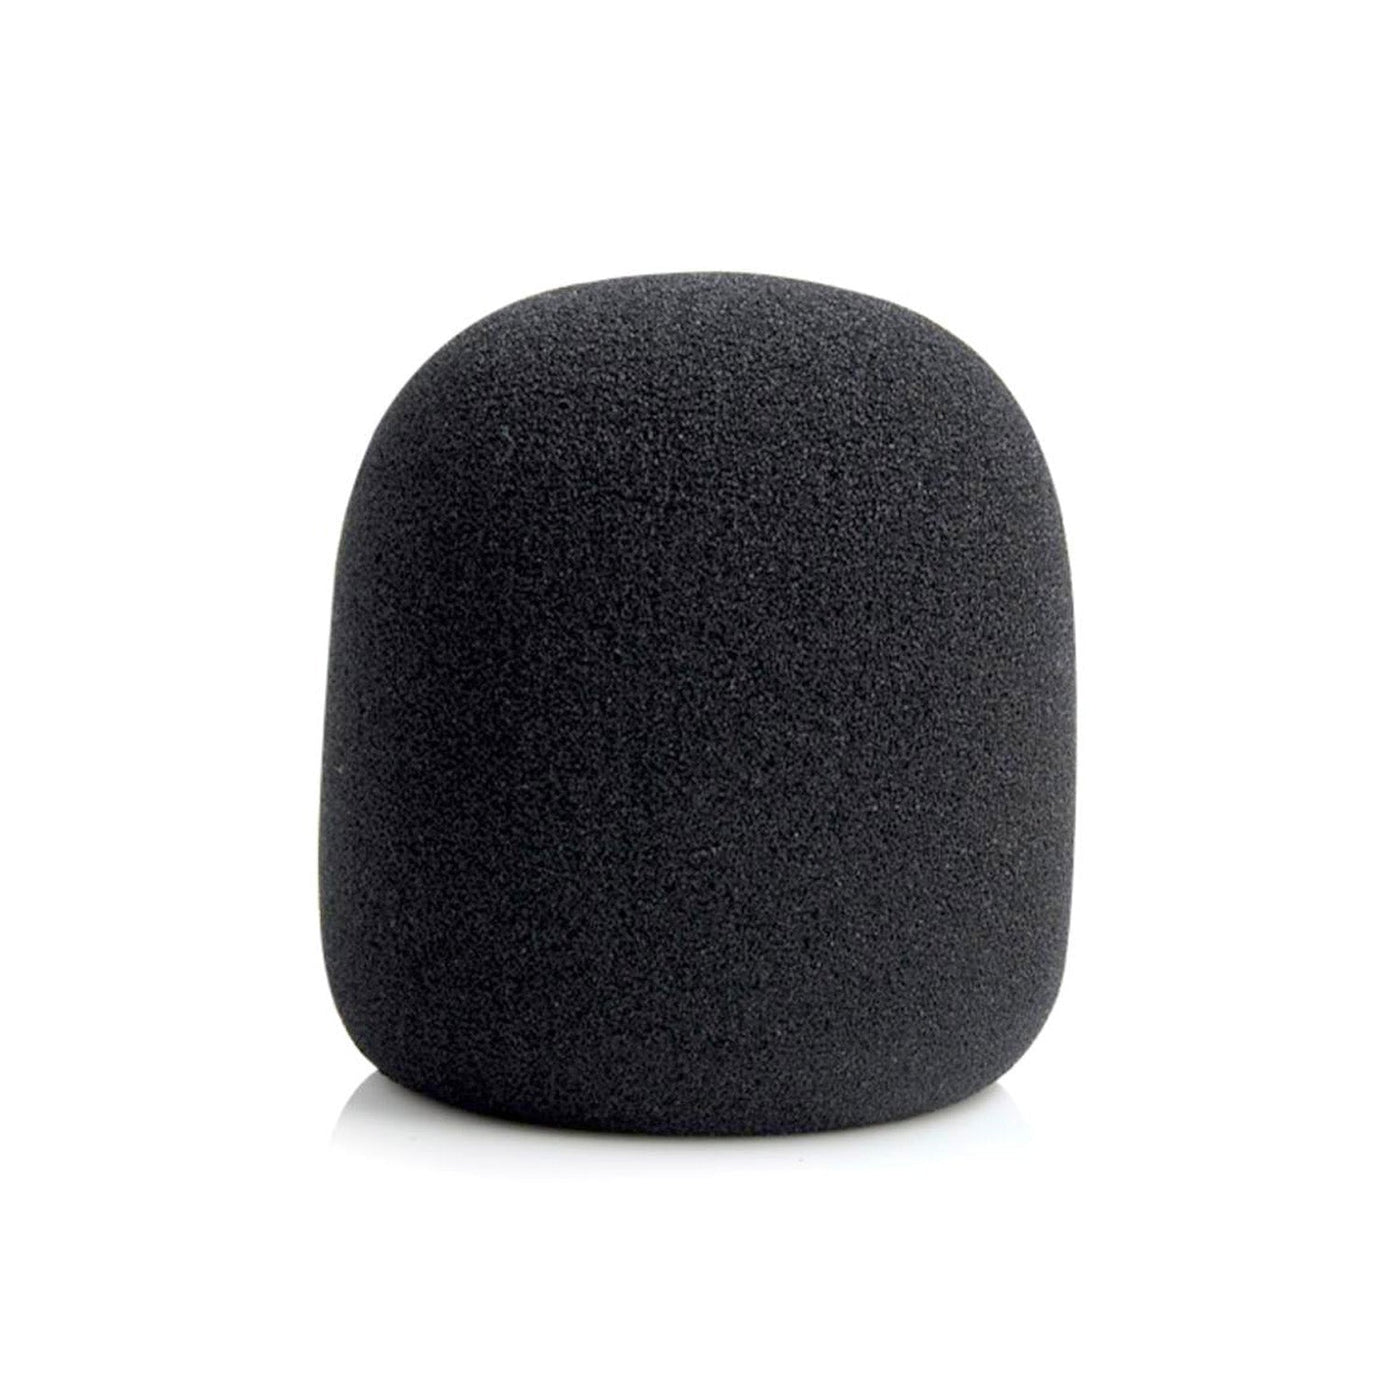 Sonitrek Microphone Foam Cap for Podcasting Wind Reduction Fits Most Standard Microphones by Mifo USA - The World's Most Advanced Wireless Earbuds for Active Movers - O5, O7